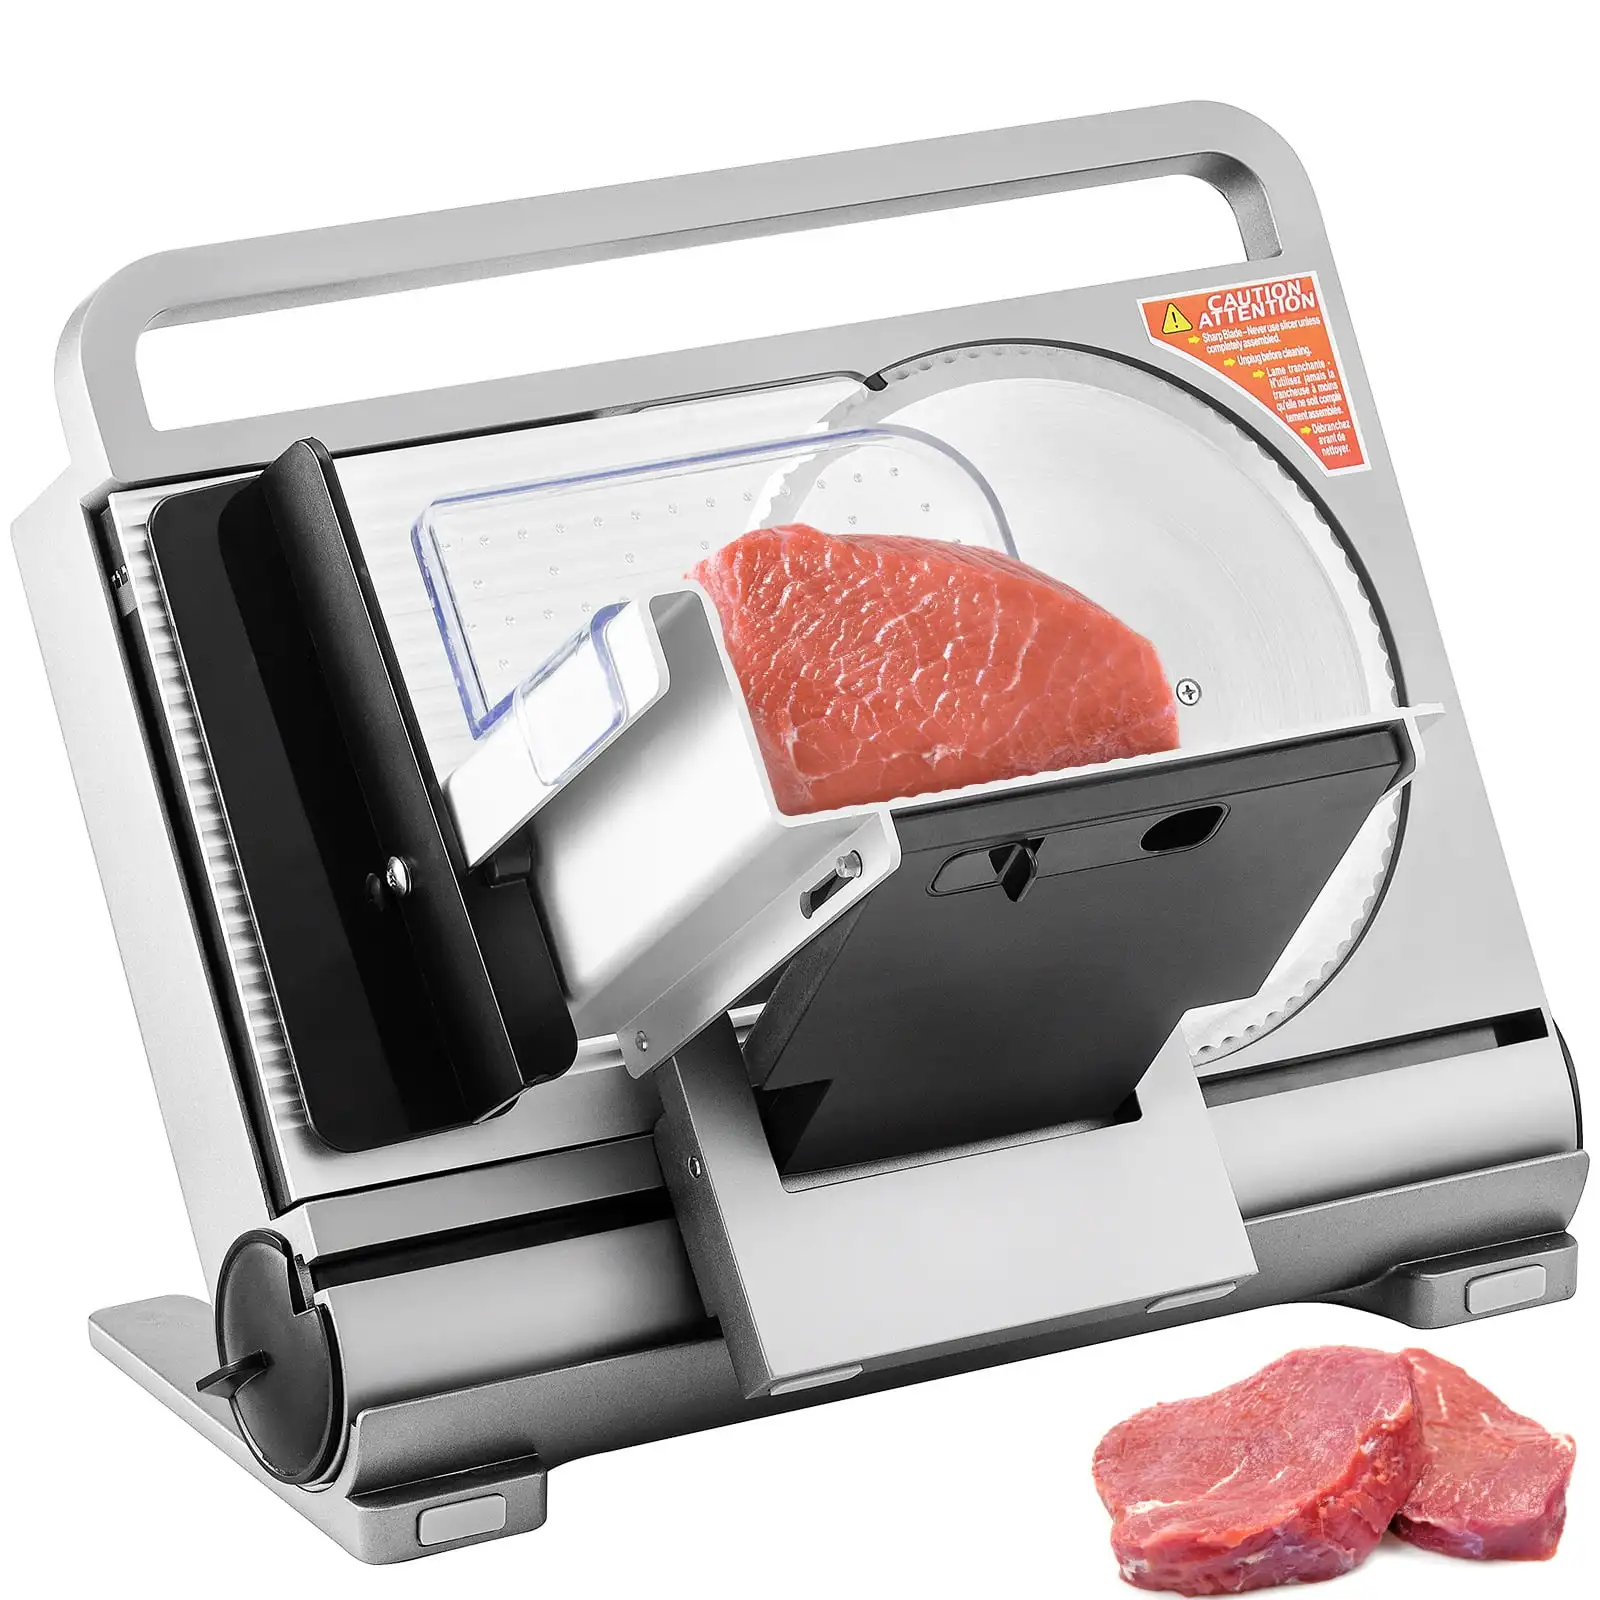 

7.5" Commercial Meat Slicer 45W Electric Deli Slicer for Meat Cheese Bread Meat Slicer Machine .USA.NEW